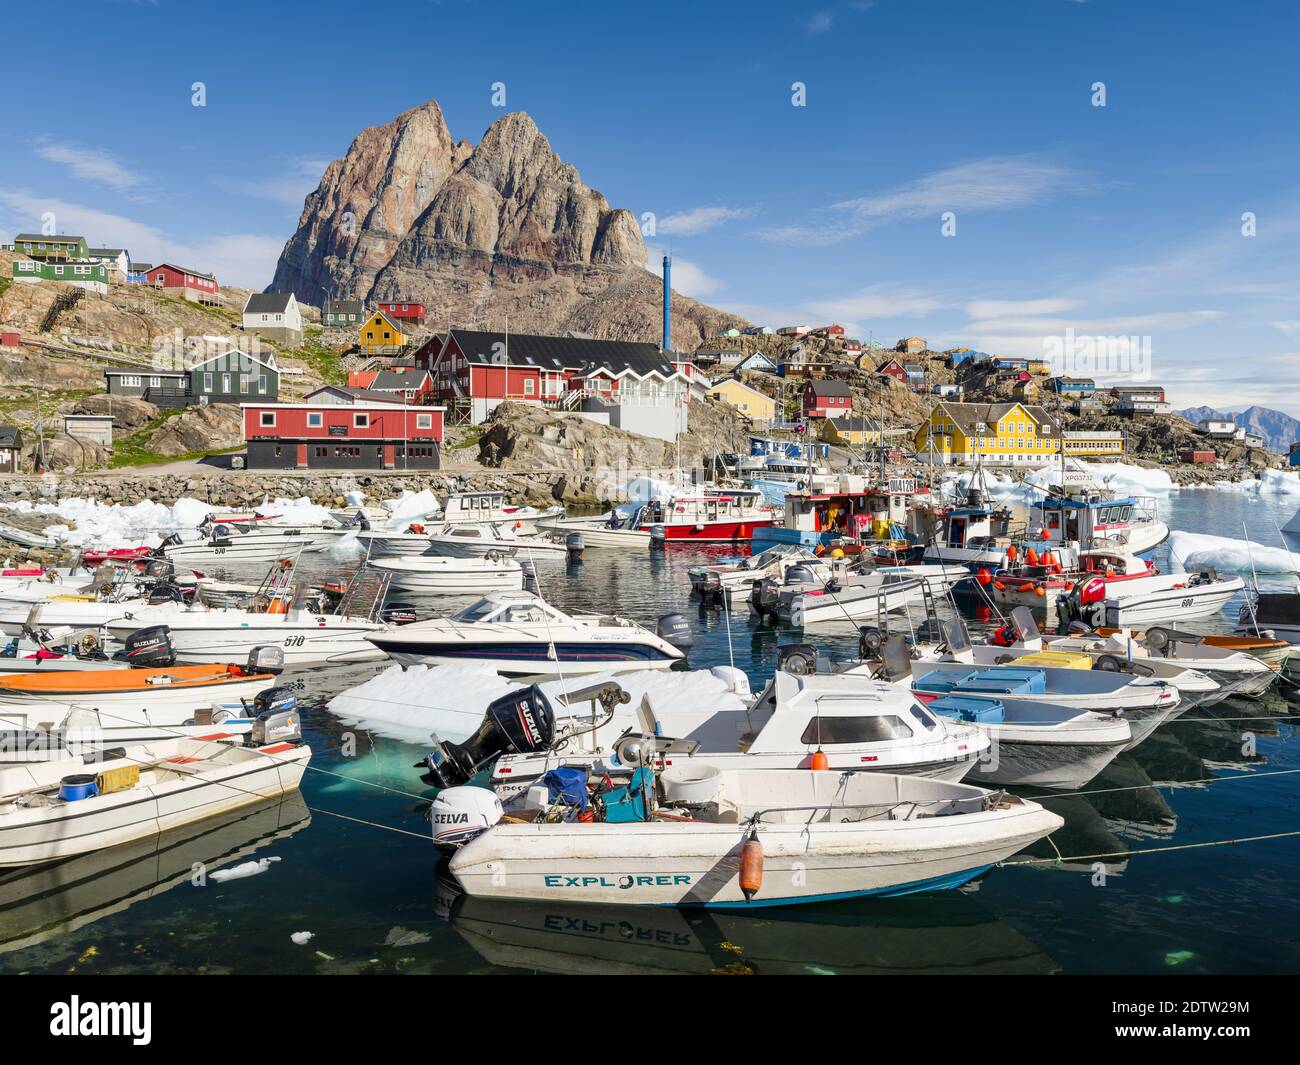 The harbour.  The town Uummannaq in the north of West Greenland, located on an island  in the Uummannaq Fjord System. America, North America, Greenlan Stock Photo